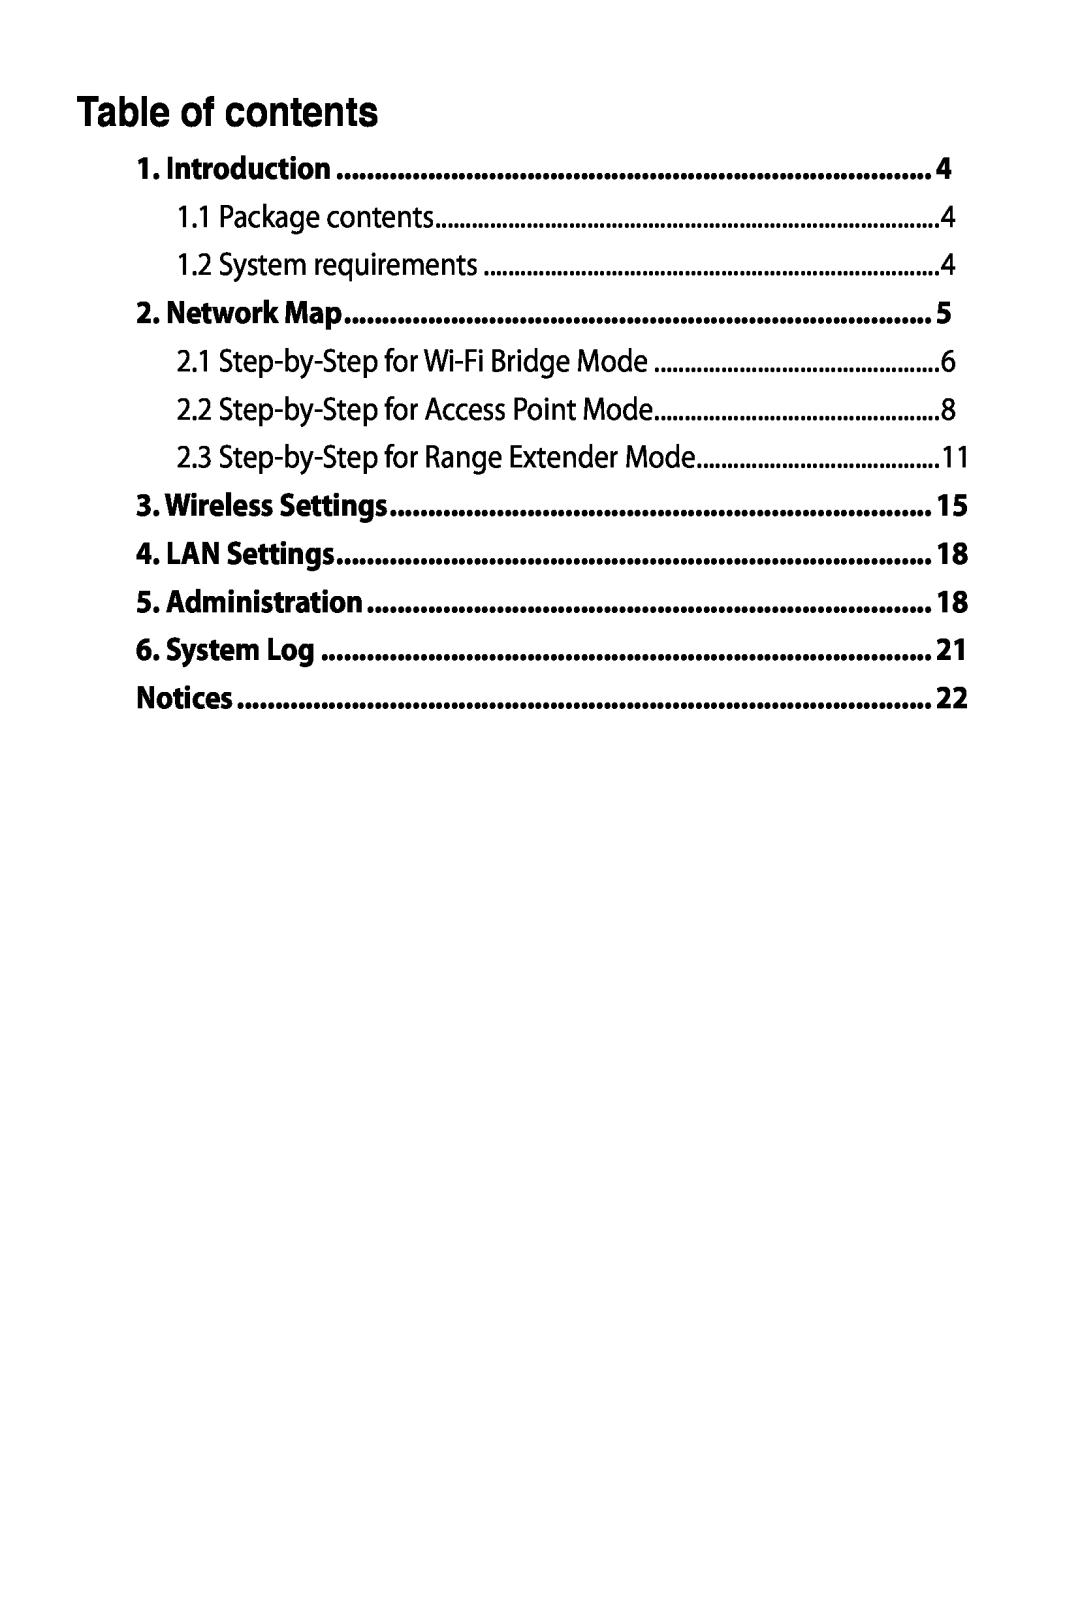 Asus EA-N66 manual Table of contents, Introduction, Package contents, System requirements, Network Map, Wireless Settings 